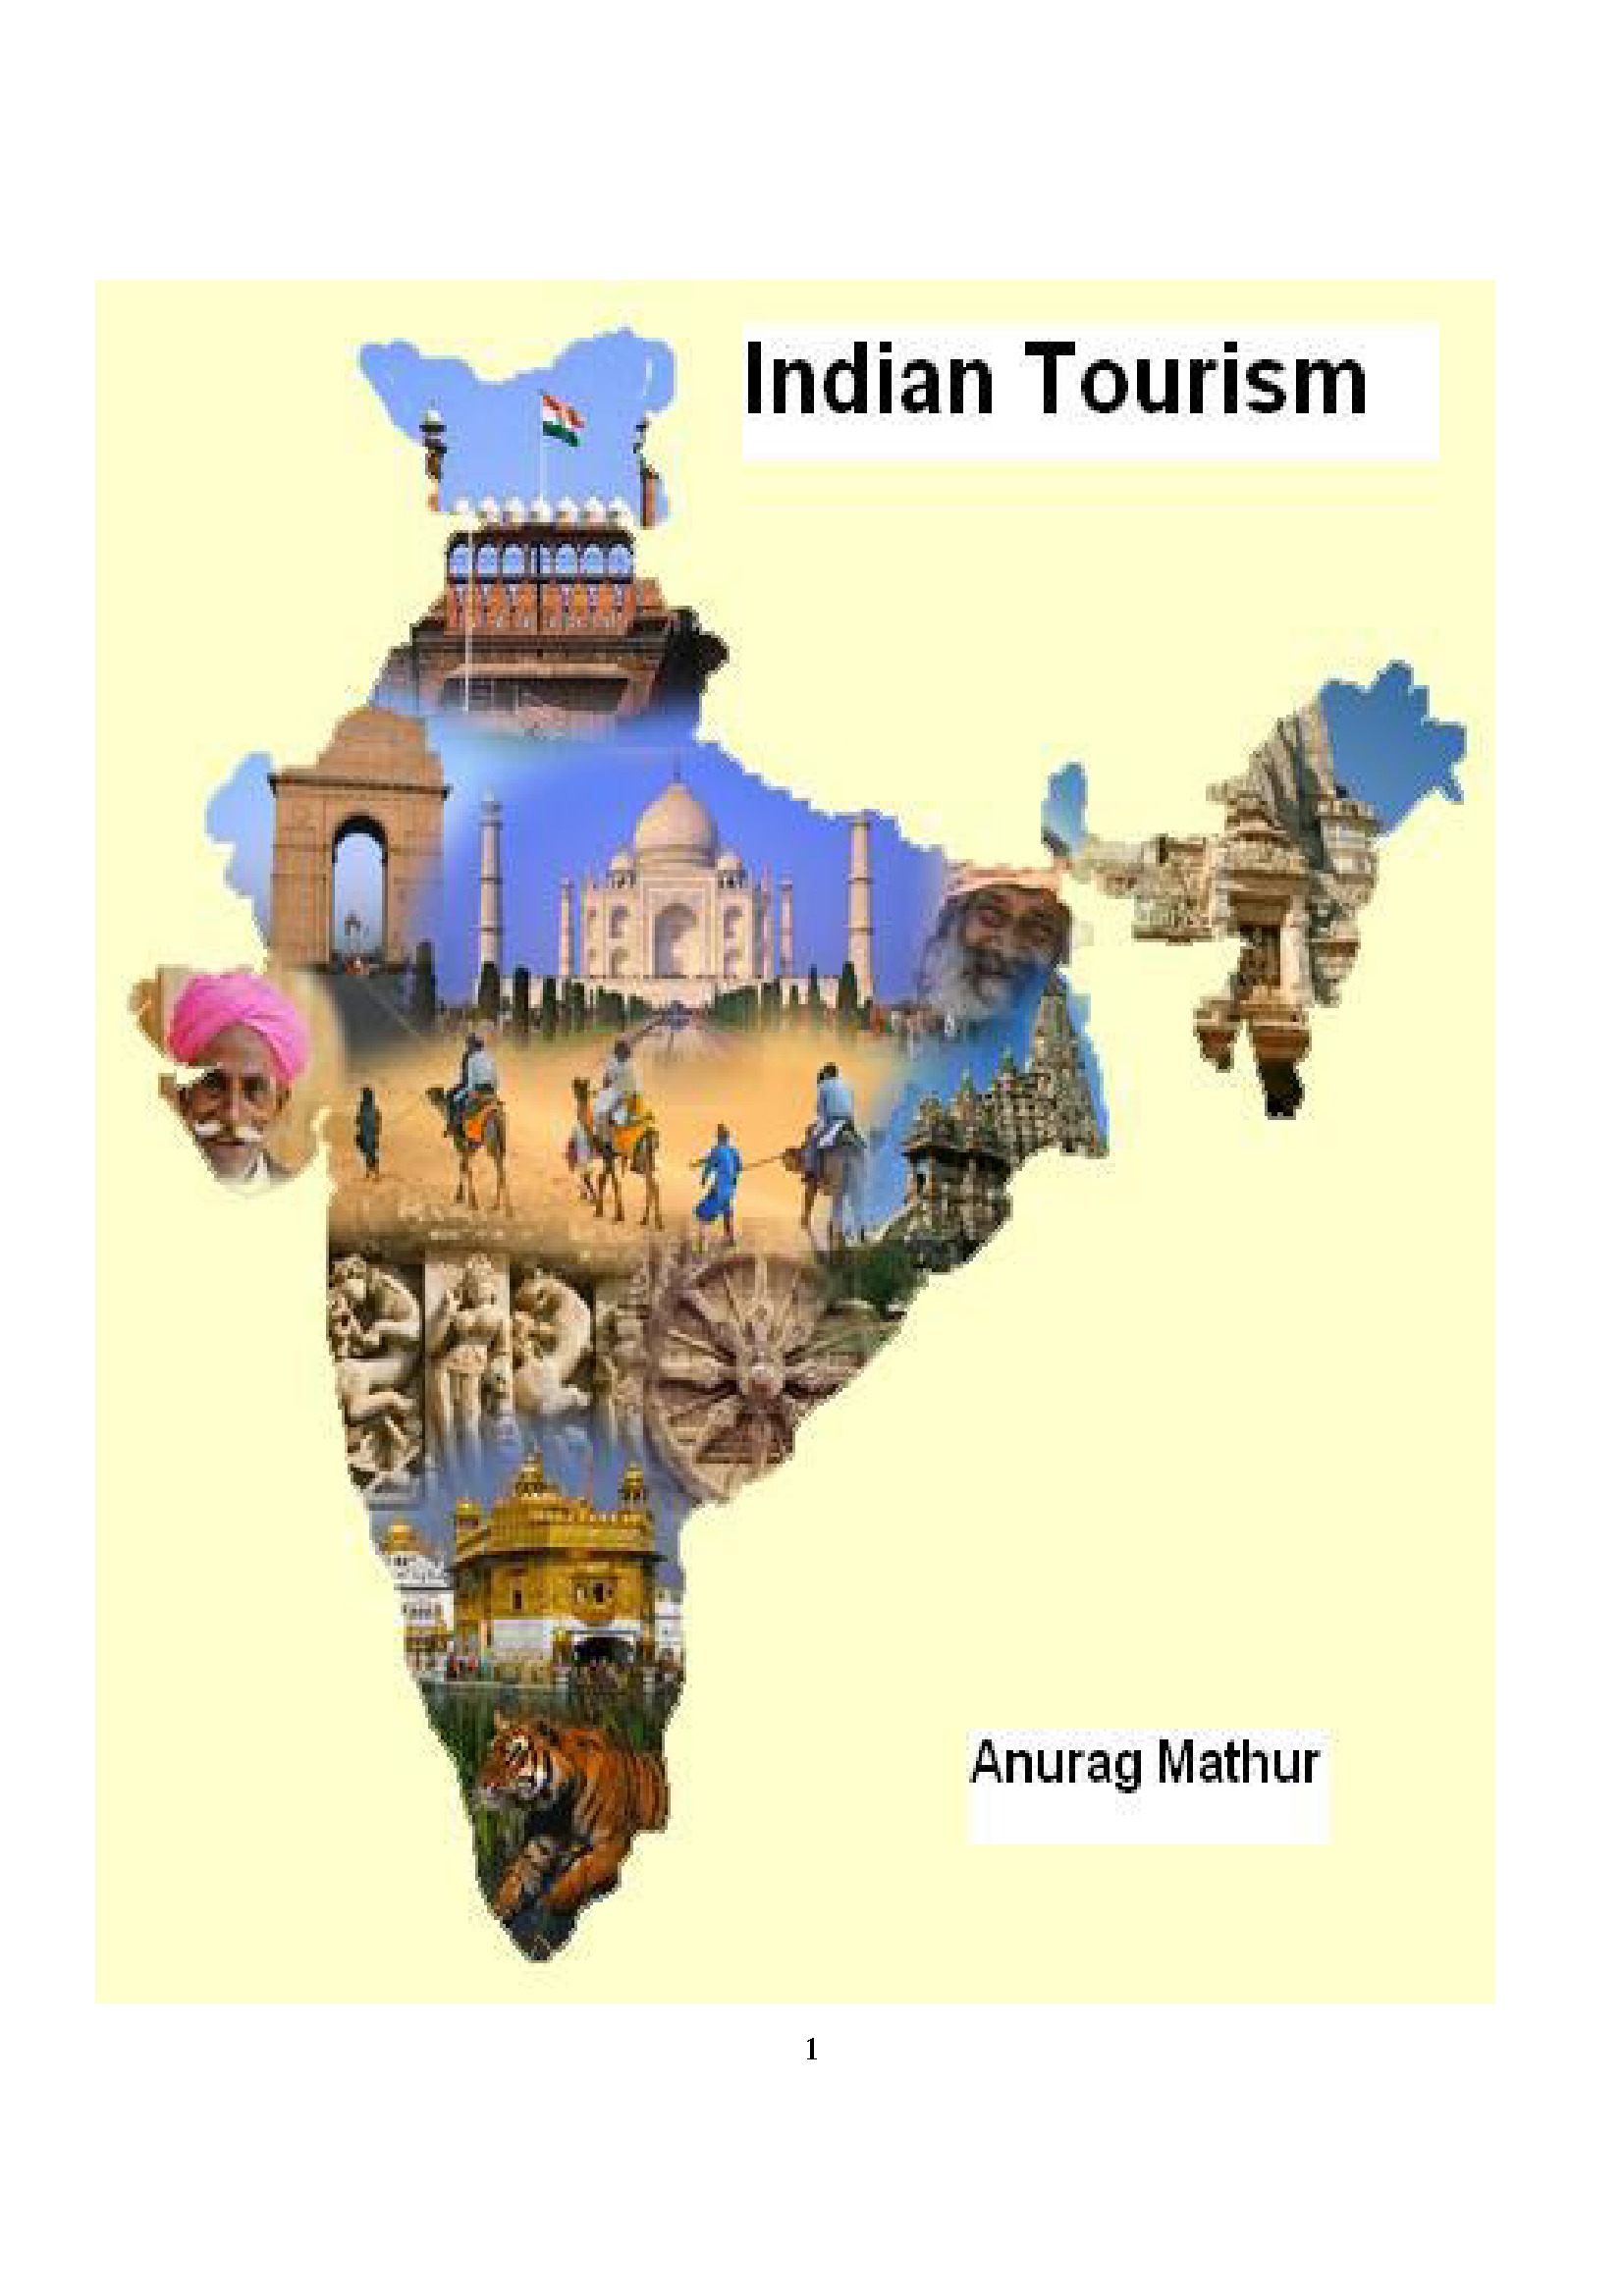 tourism in india research